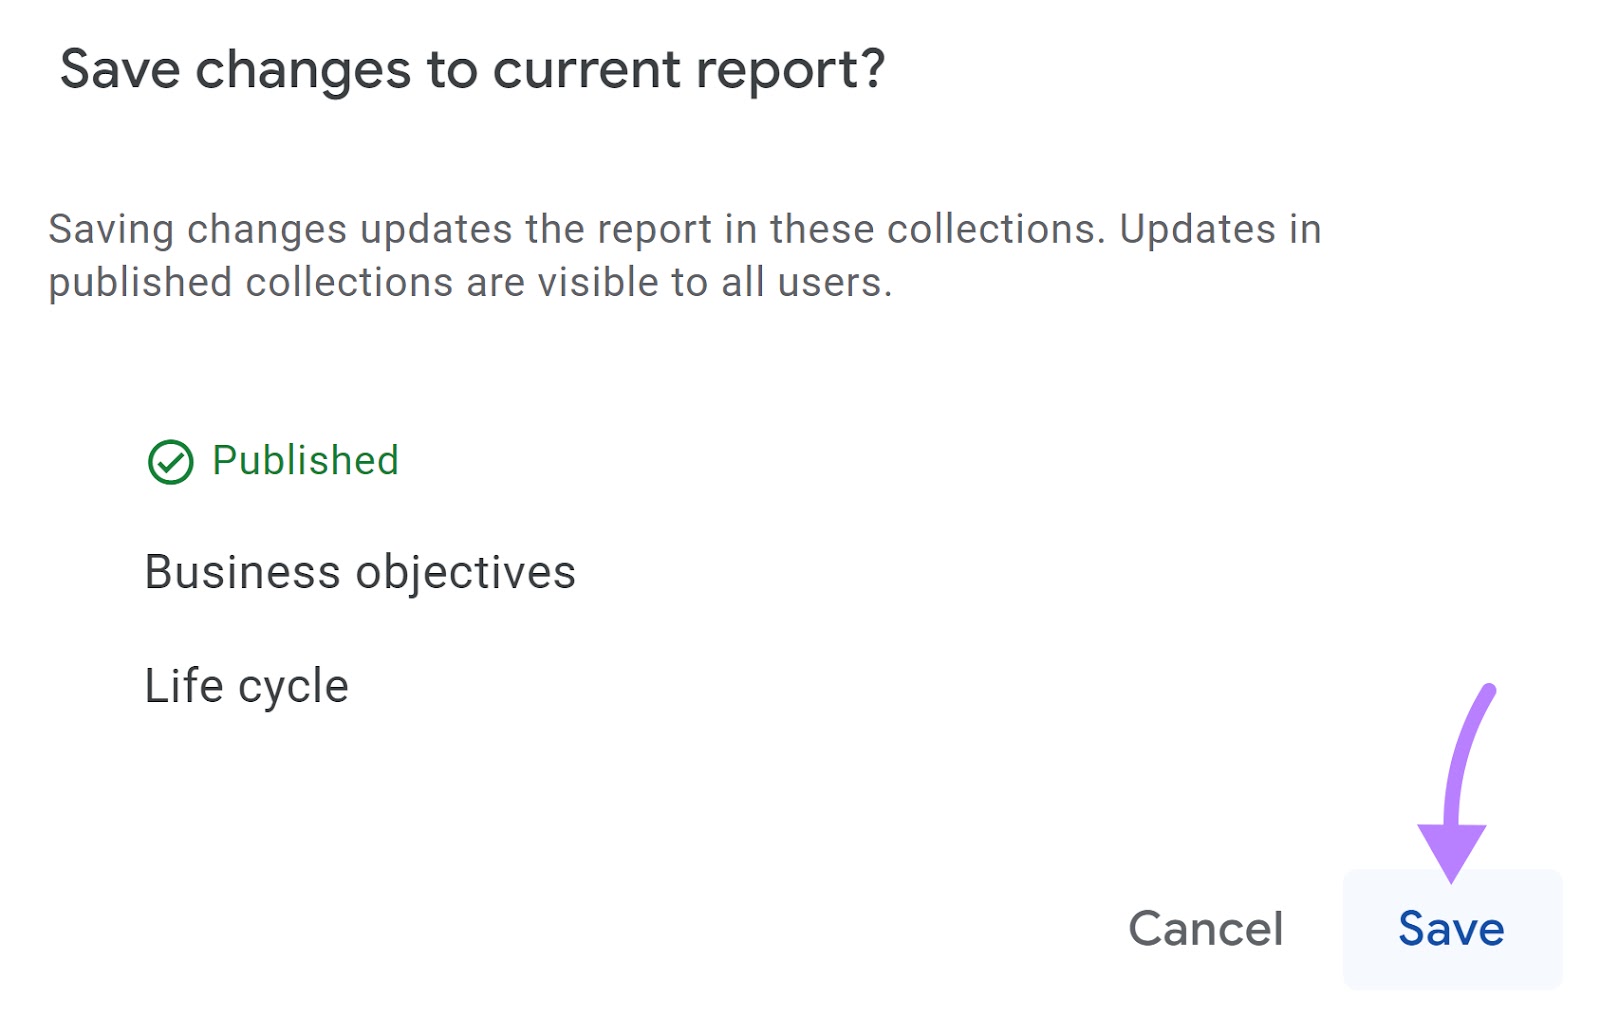 Save changes to current report pop-up window